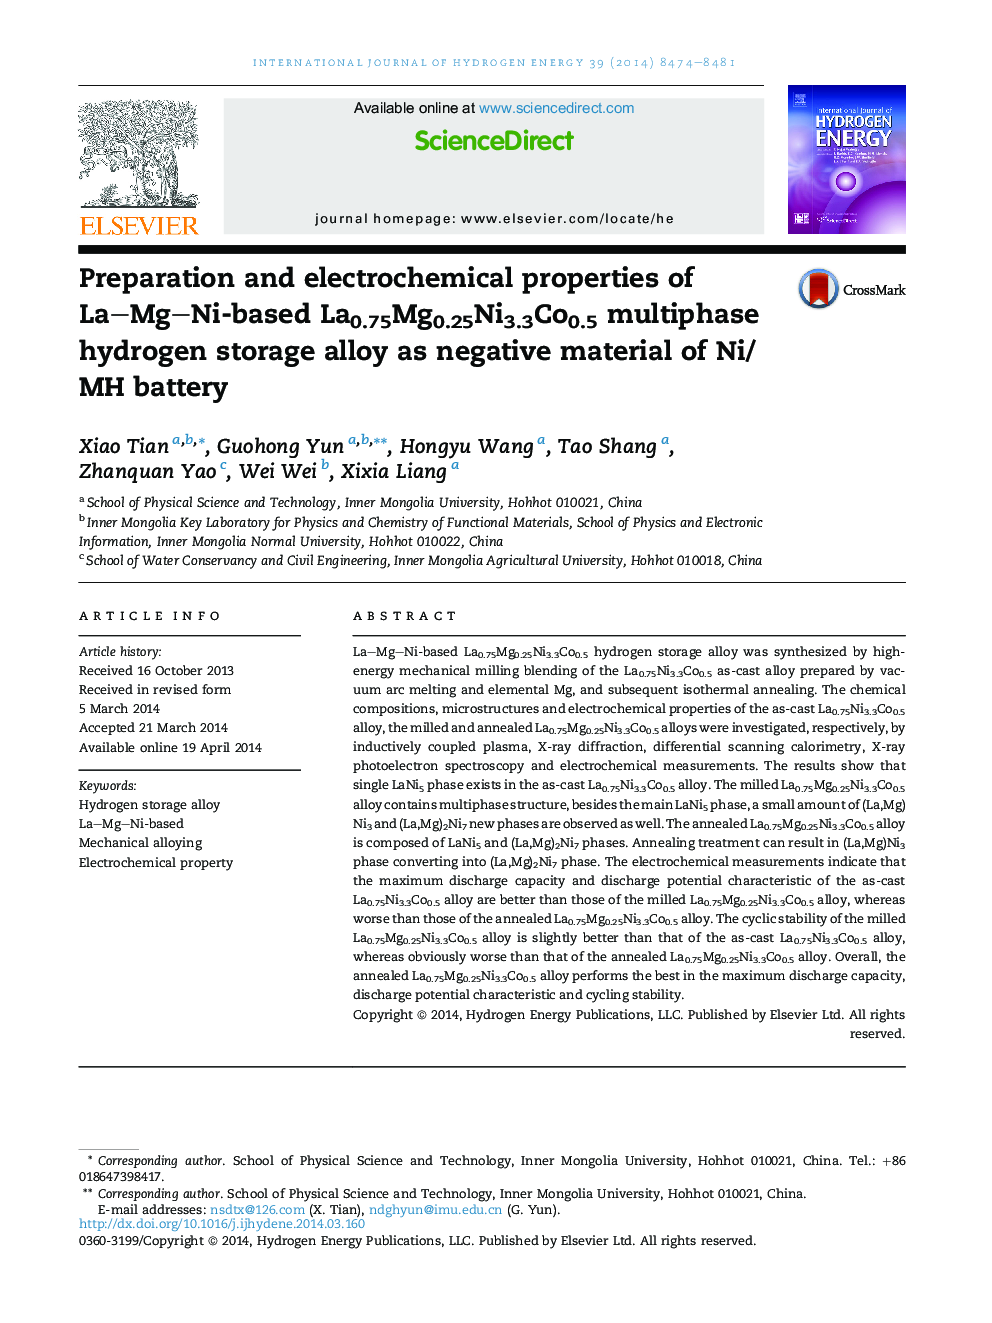 Preparation and electrochemical properties of La-Mg-Ni-based La0.75Mg0.25Ni3.3Co0.5 multiphase hydrogen storage alloy as negative material of Ni/MH battery